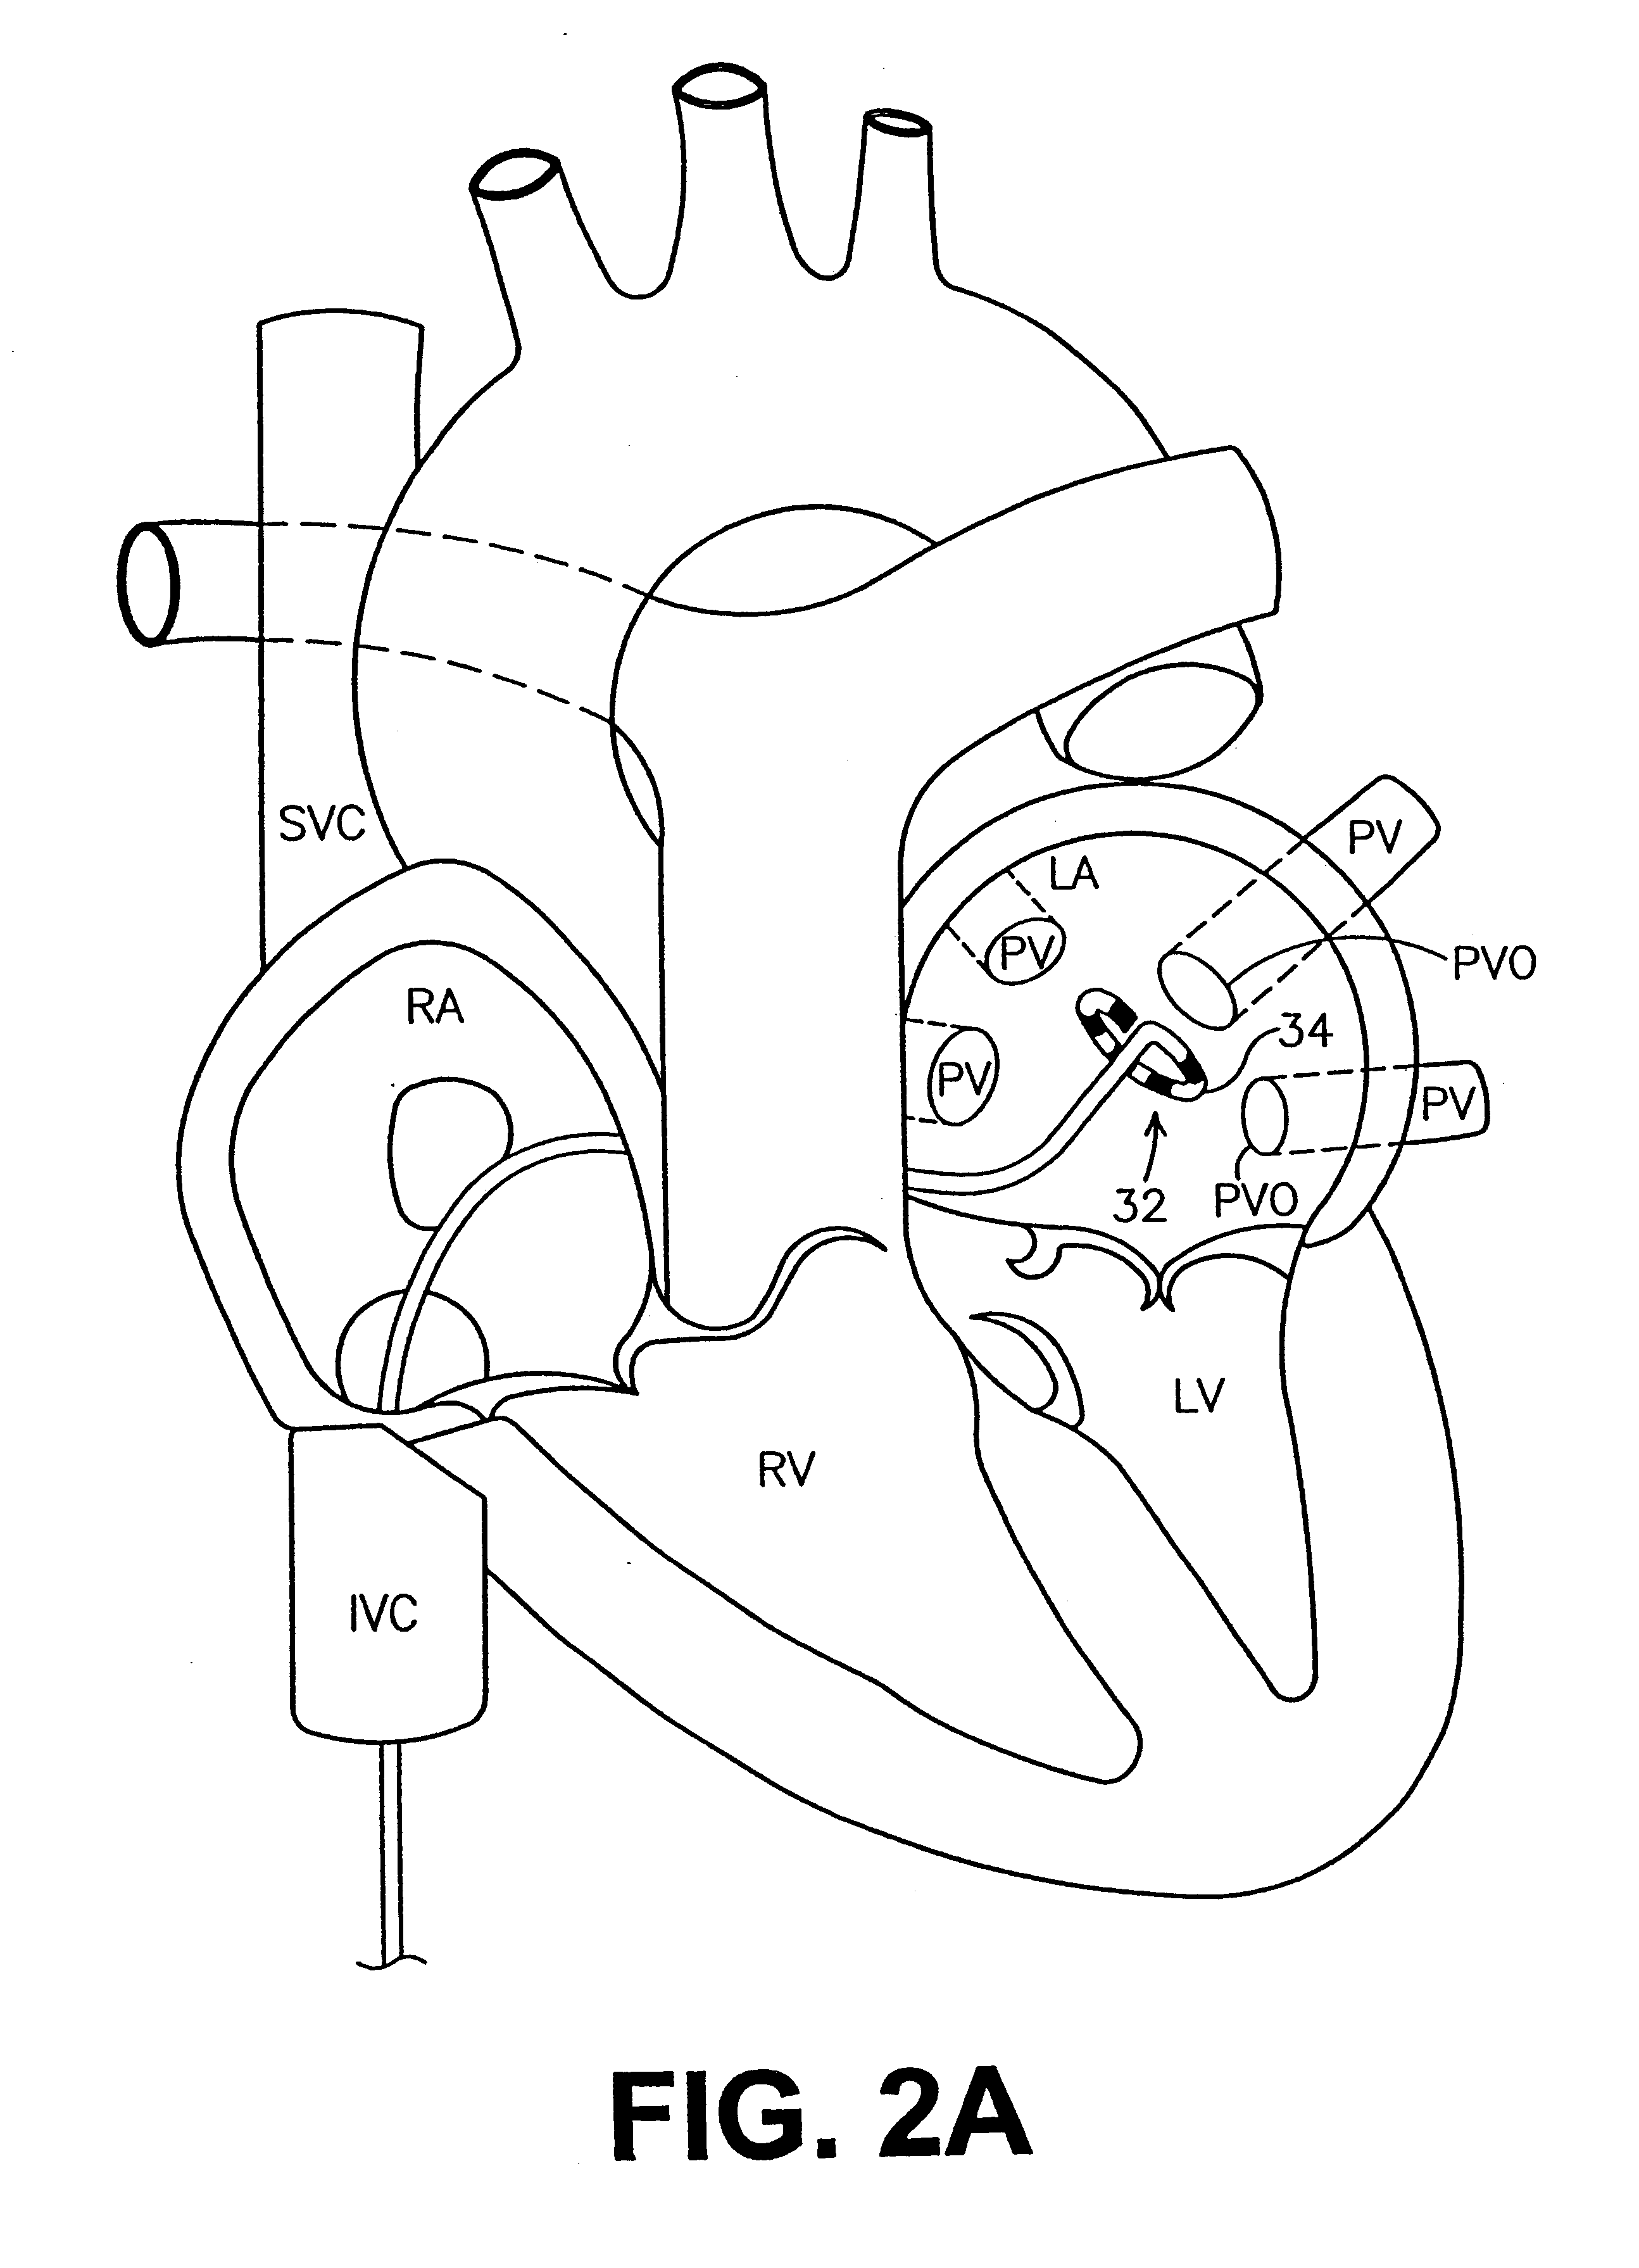 Ablation catheter and method for isolating a pulmonary vein